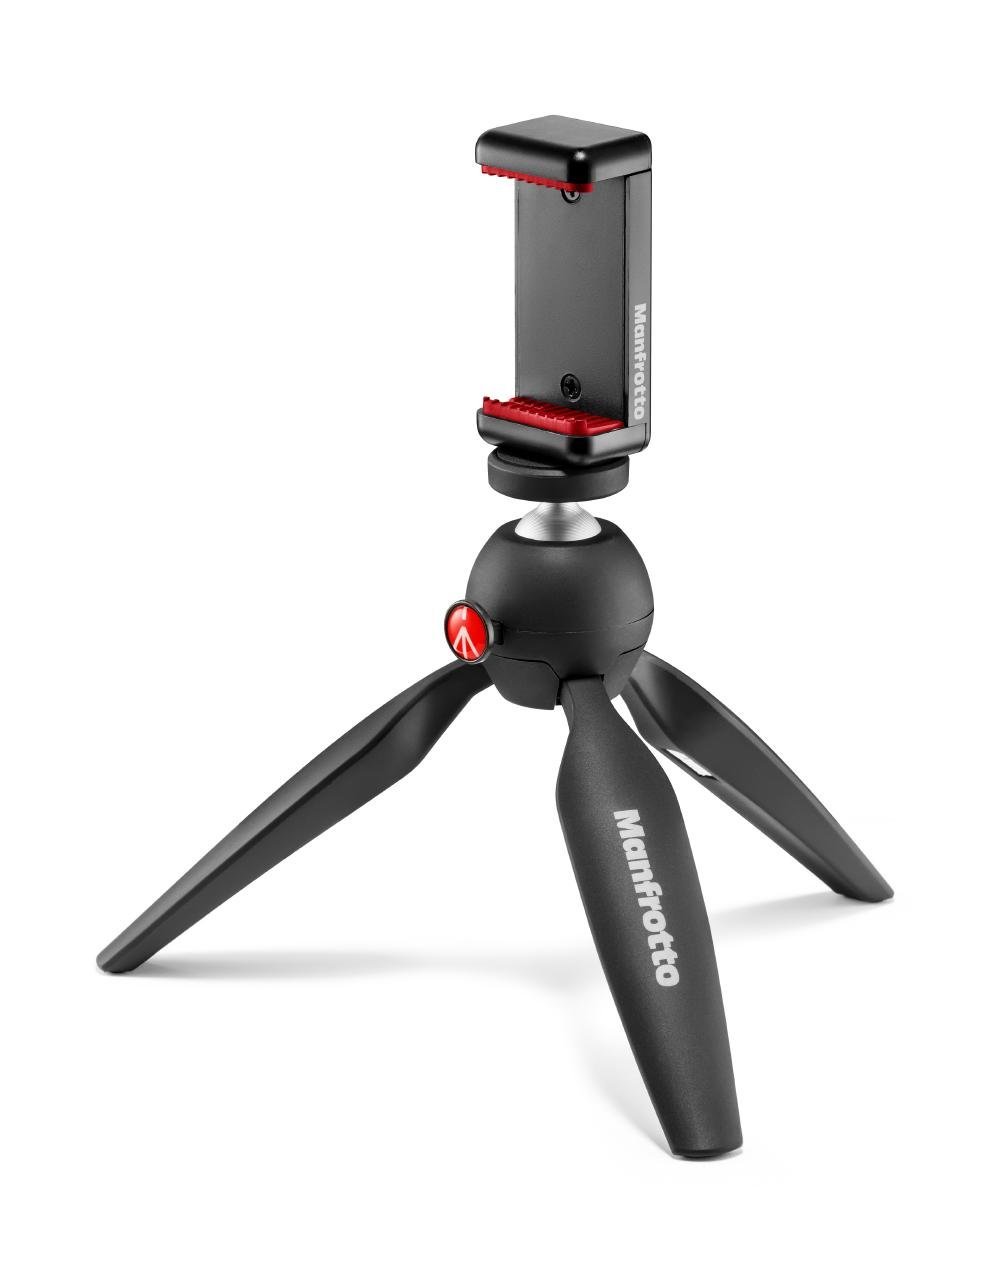 Manfrotto Stand for Universal Cell Phone - Black - image 1 of 5